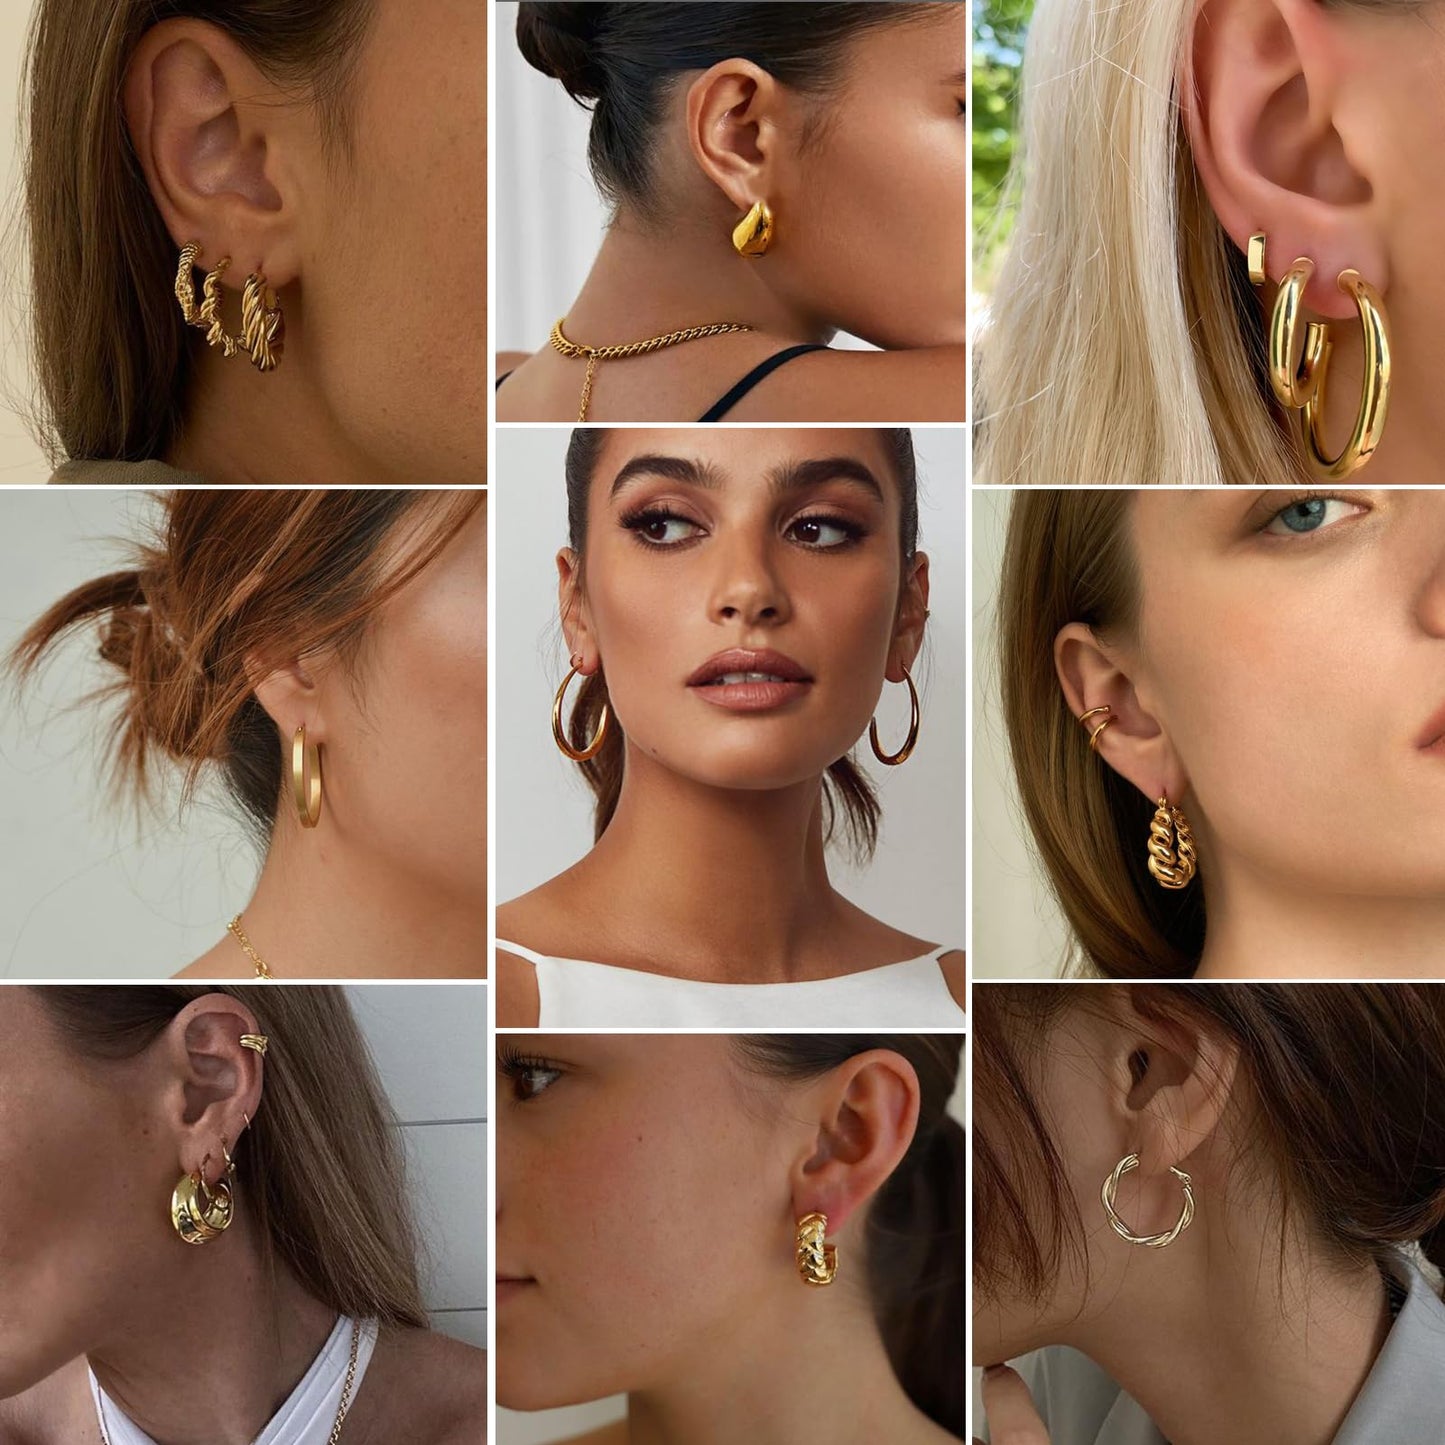 36 Pairs Gold Hoop Earrings Set for Women Girls, Fashion Chunky Gold Hoop Earrings Multipack, Hypoallergenic Pearl Chain Twisted Statement Earring Pack for Birthday Party Jewelry Gift